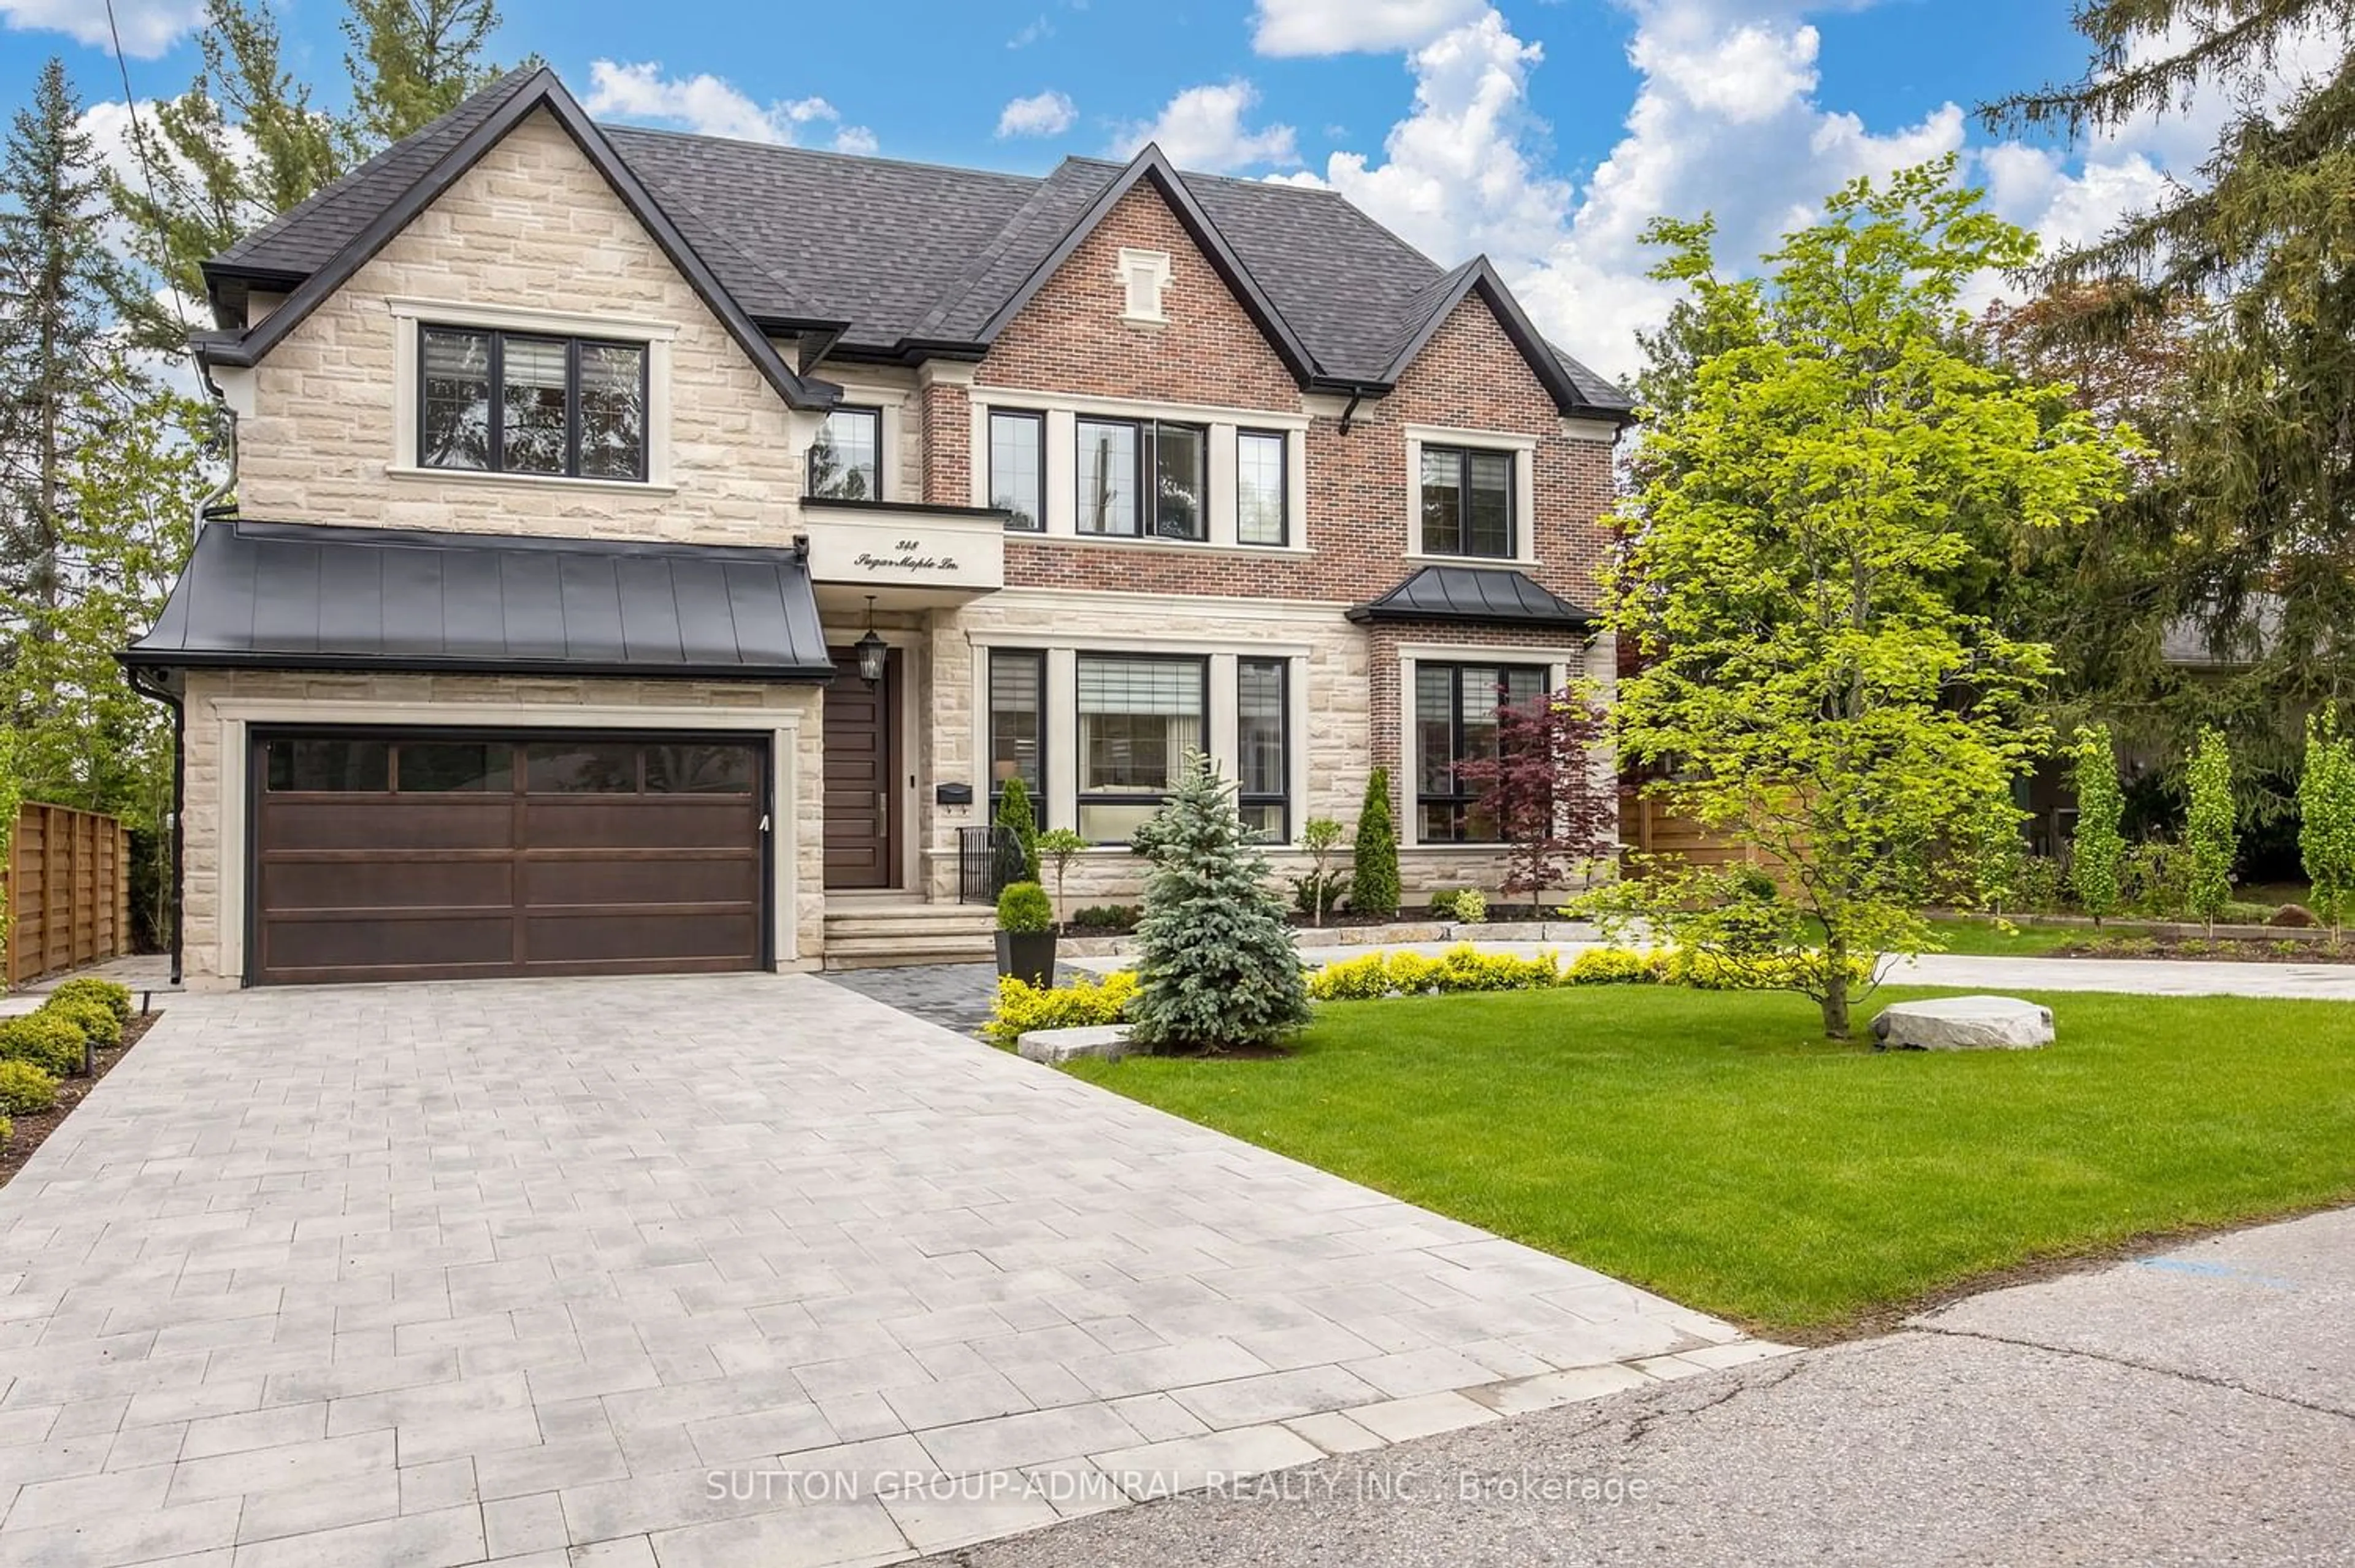 Home with brick exterior material for 348 Sugar Maple Lane, Richmond Hill Ontario L4C 4C2